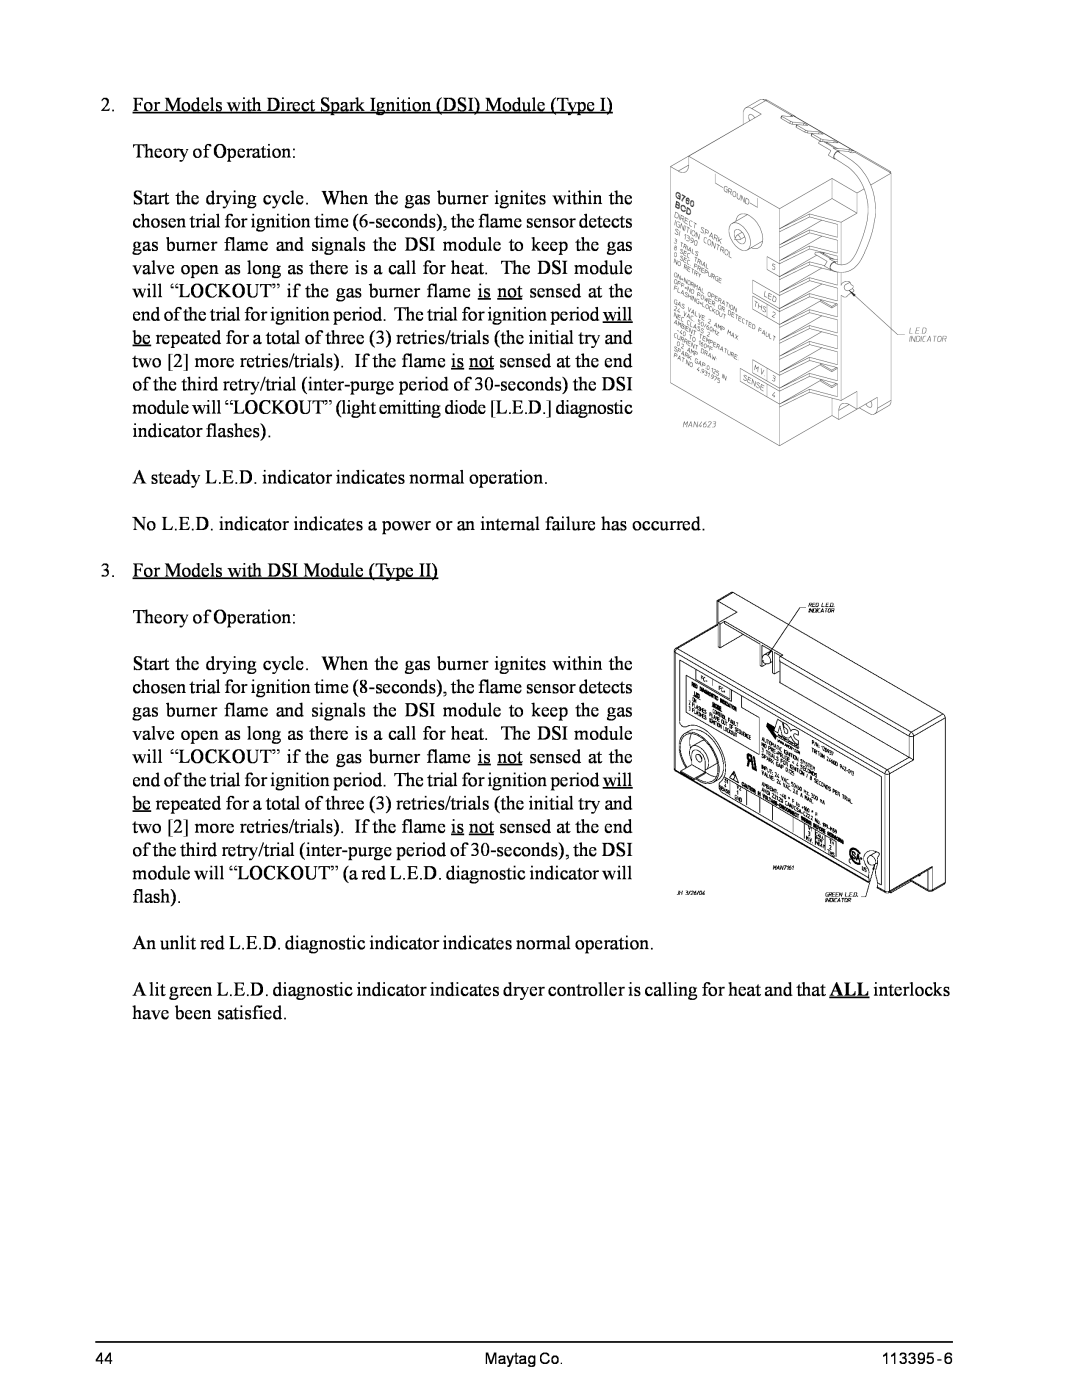 American Dryer Corp MD-170PTVW, MDG-120PVV installation manual For Models with Direct Spark Ignition DSI Module Type 